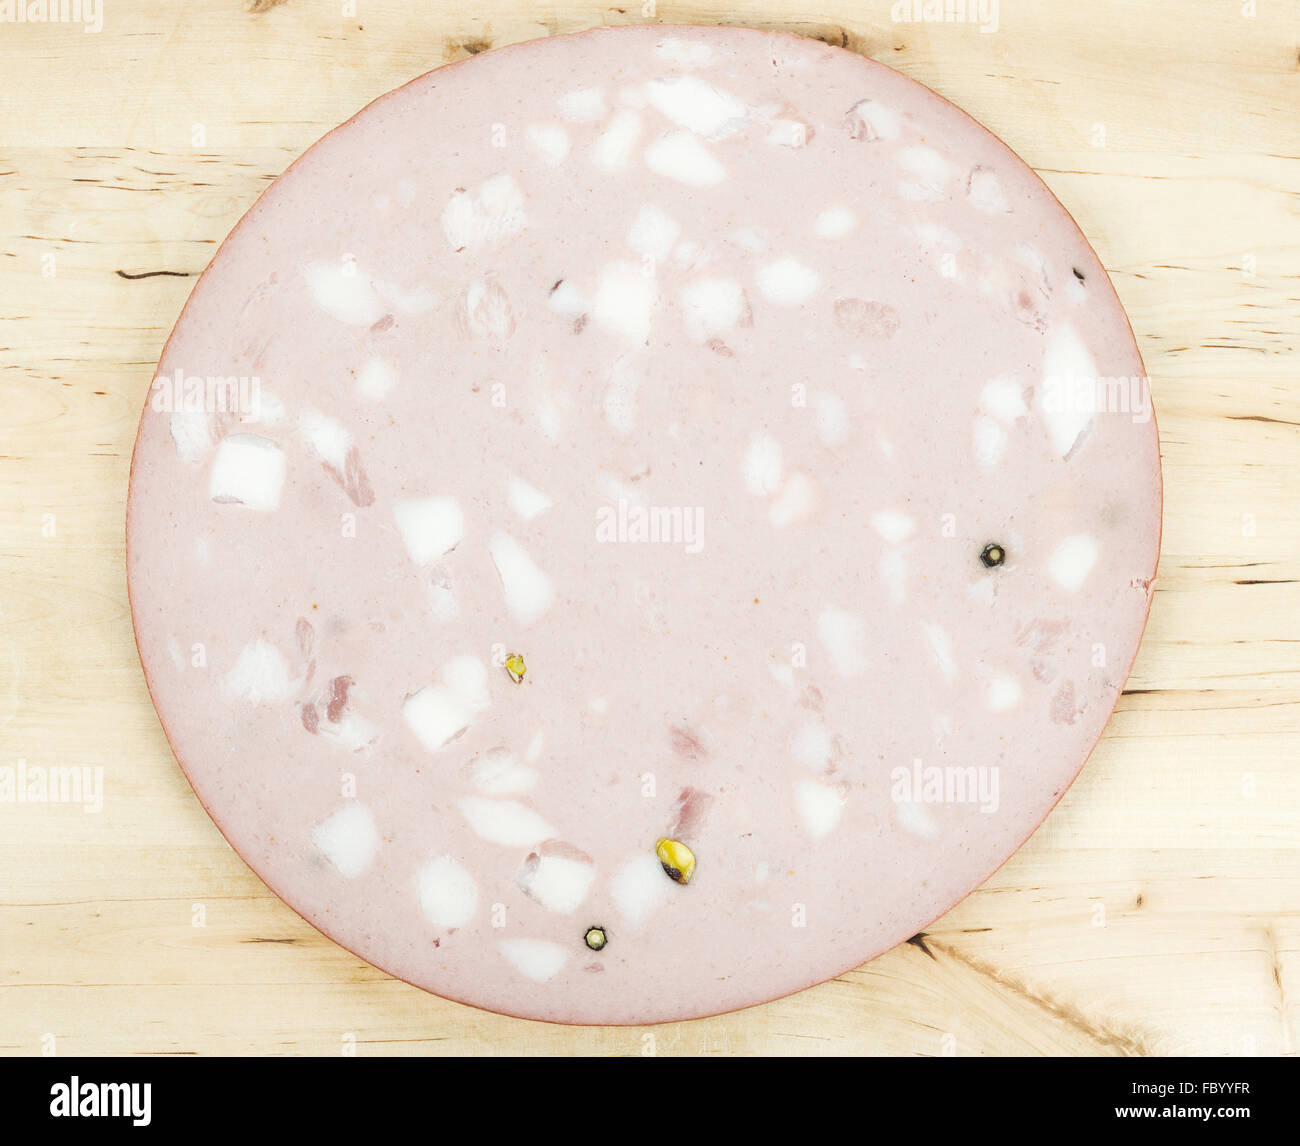 Mortadella Bologna italian pork sausage or cold cut on wood background or texture close up. Mortadella Igp is a staple food prod Stock Photo